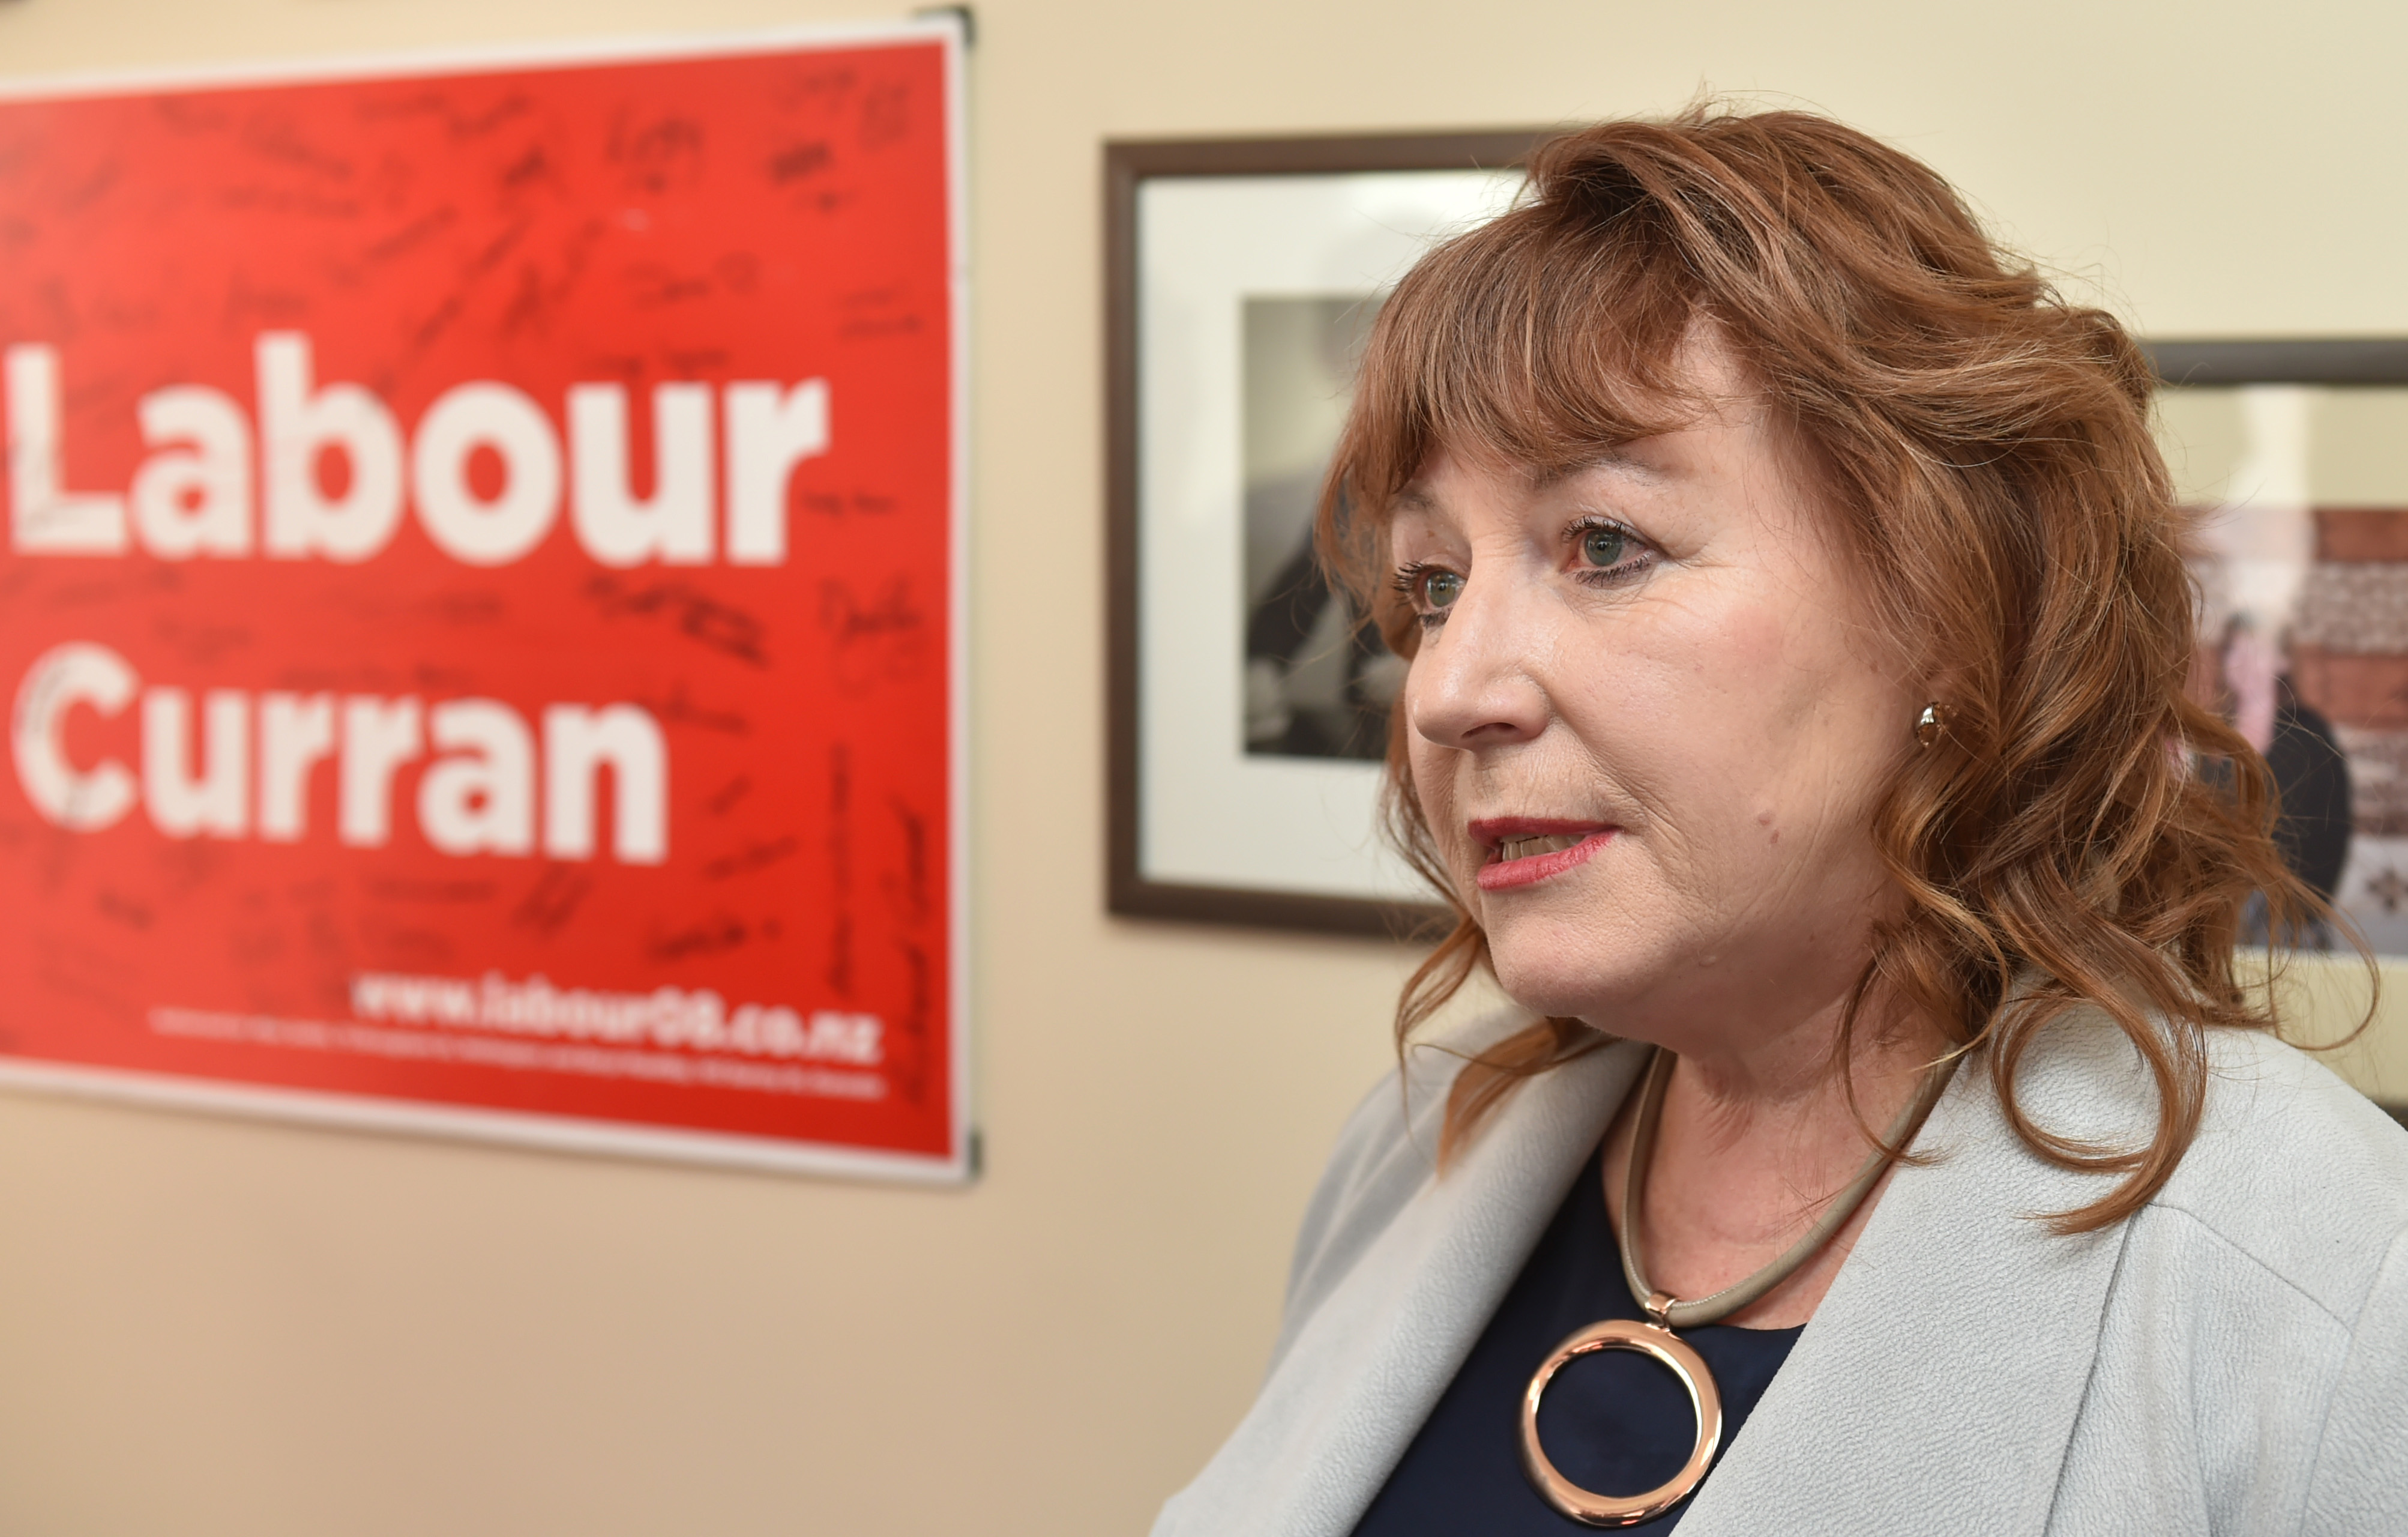 Dunedin South MP Clare Curran talks to media in her electorate office following her sacking from...